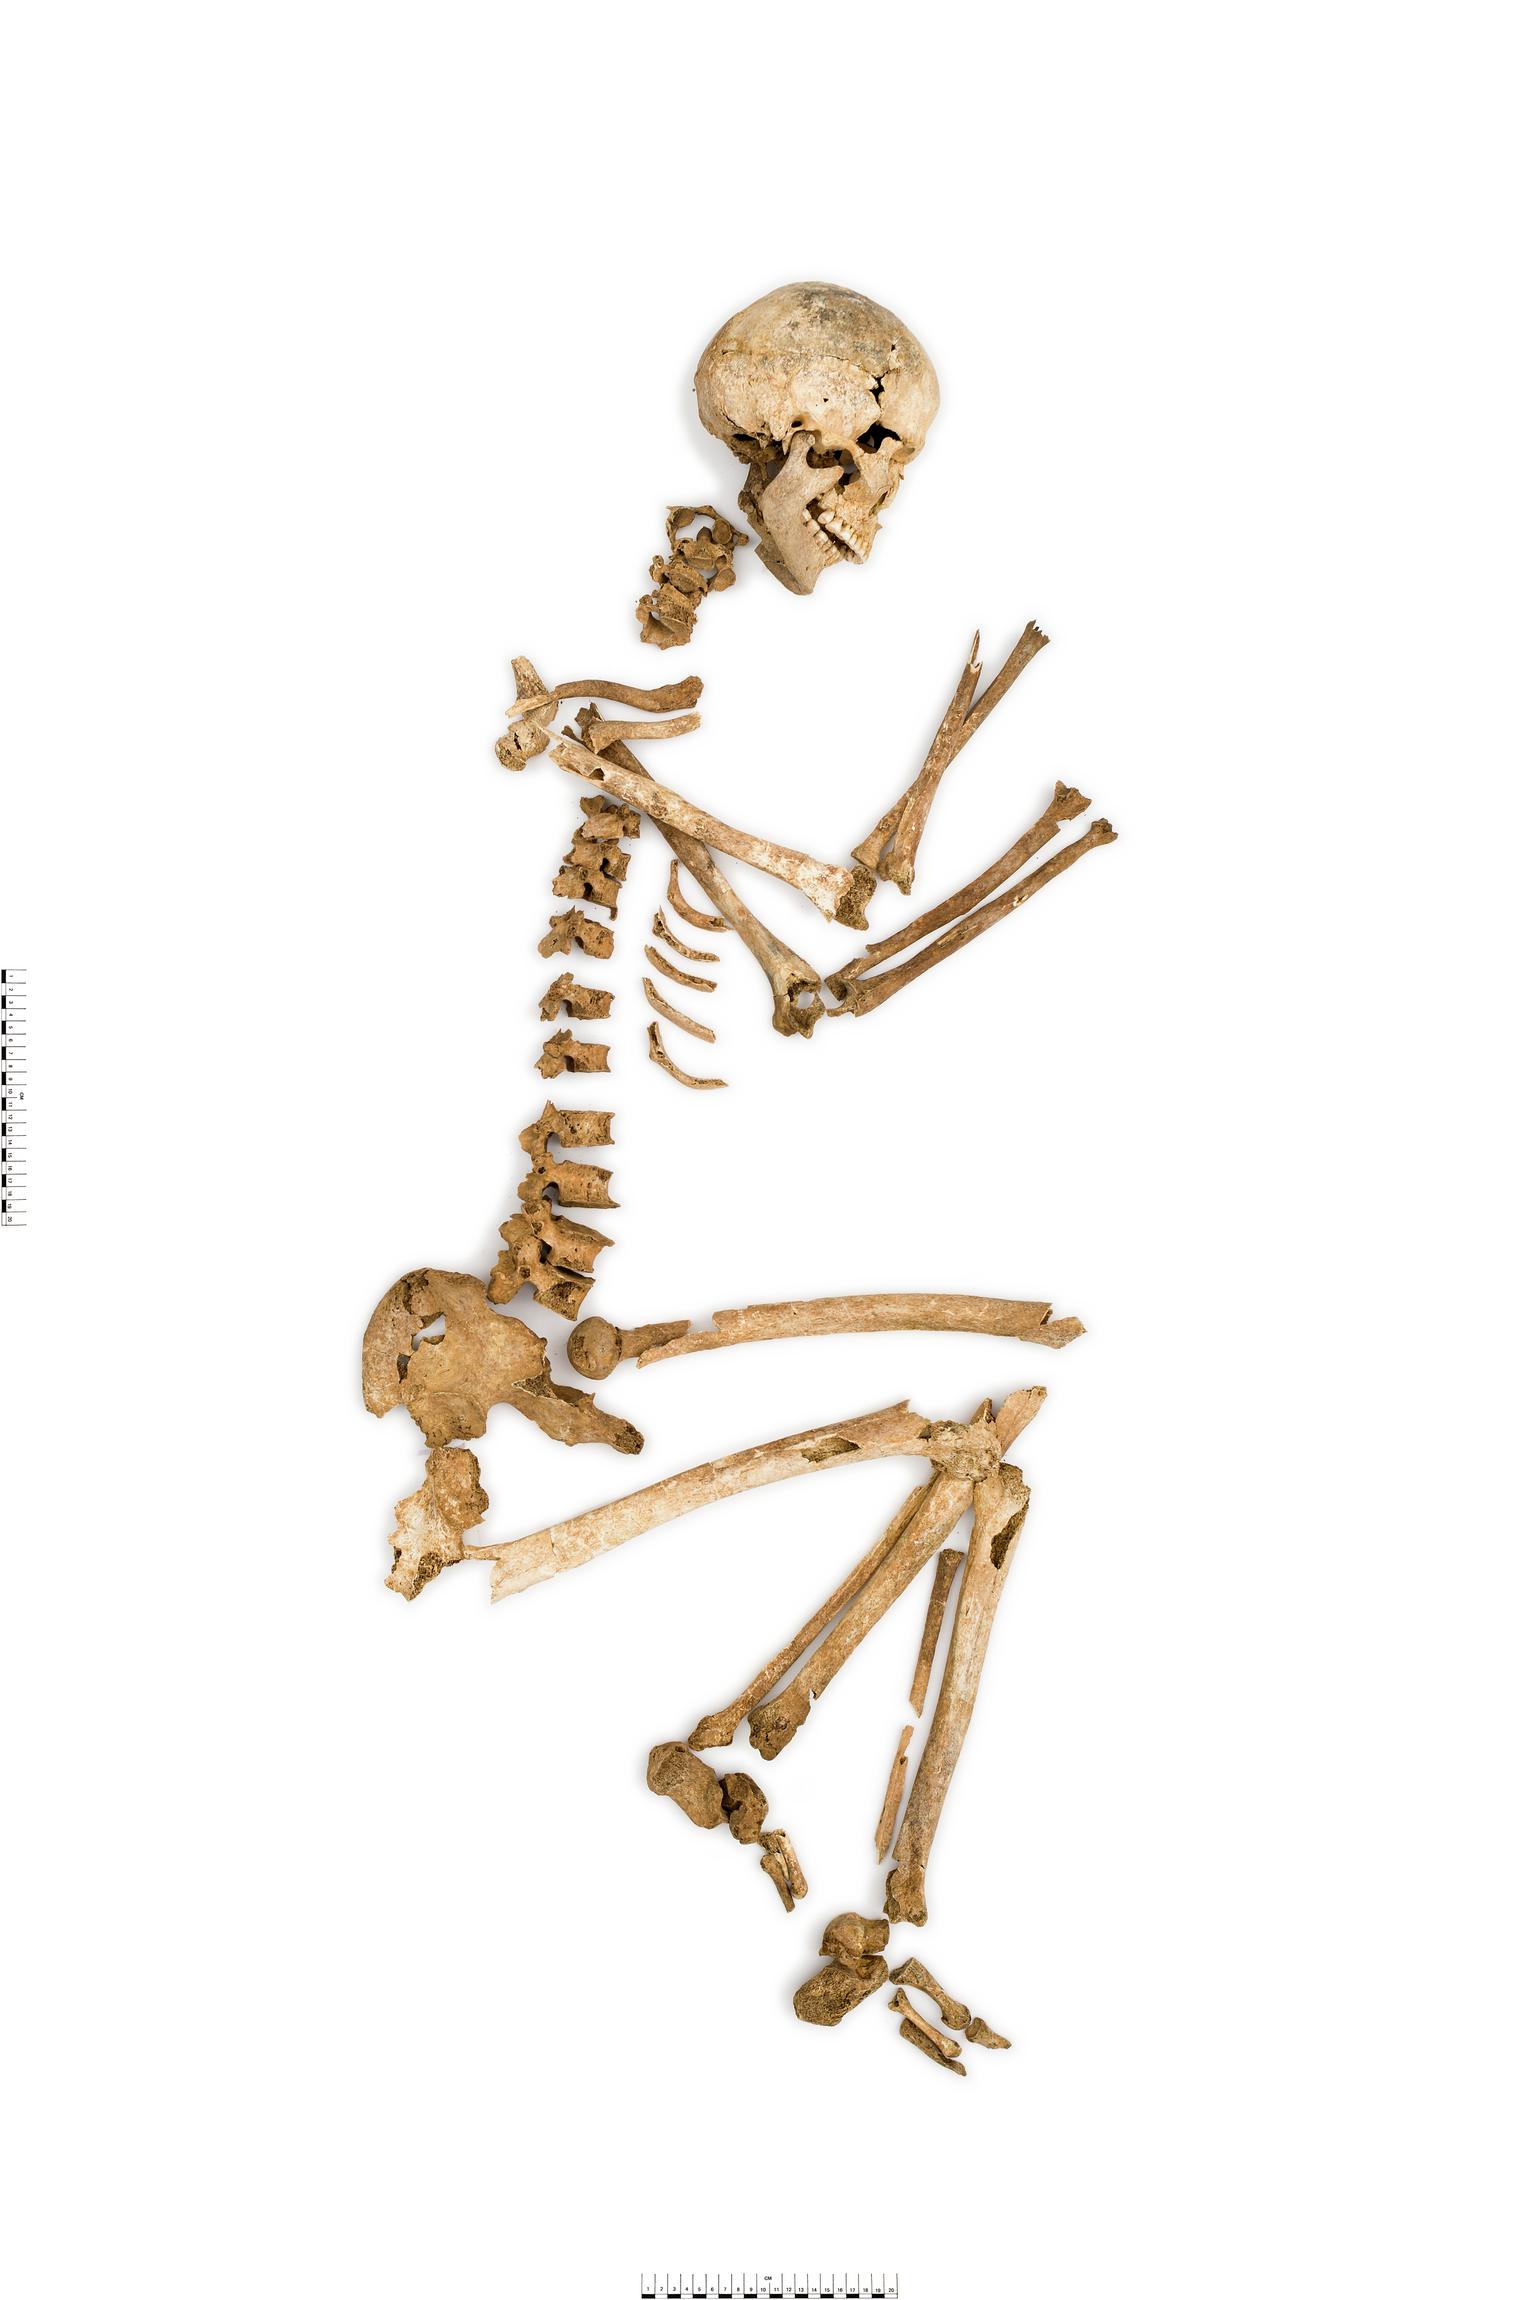 Early Bronze Age human remains